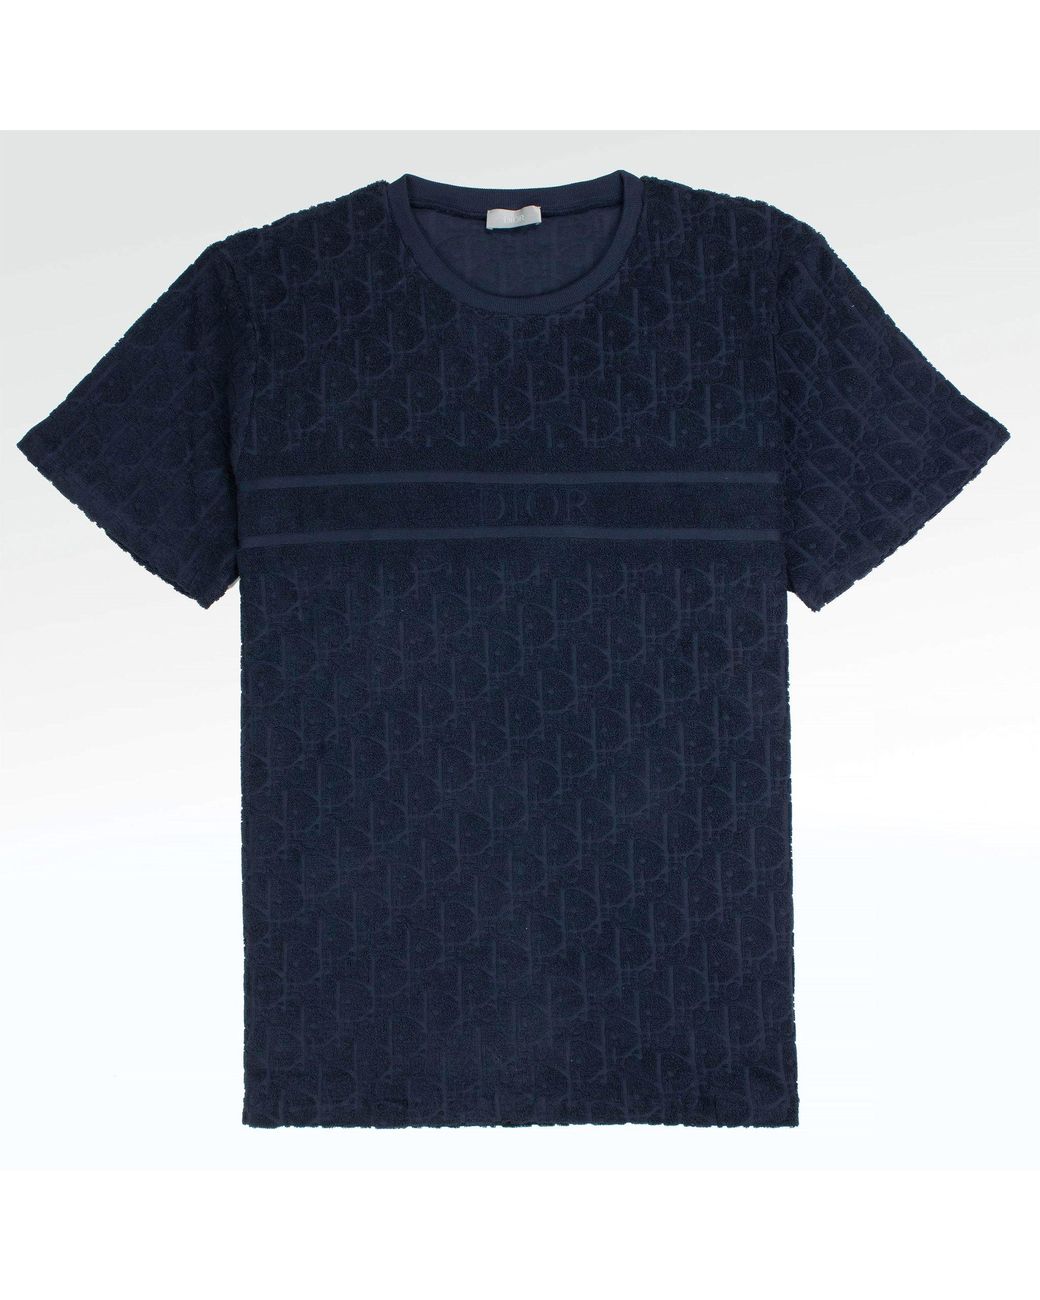 Dior Cotton Oblique Towelling Navy T Shirt in Blue for Men - Lyst